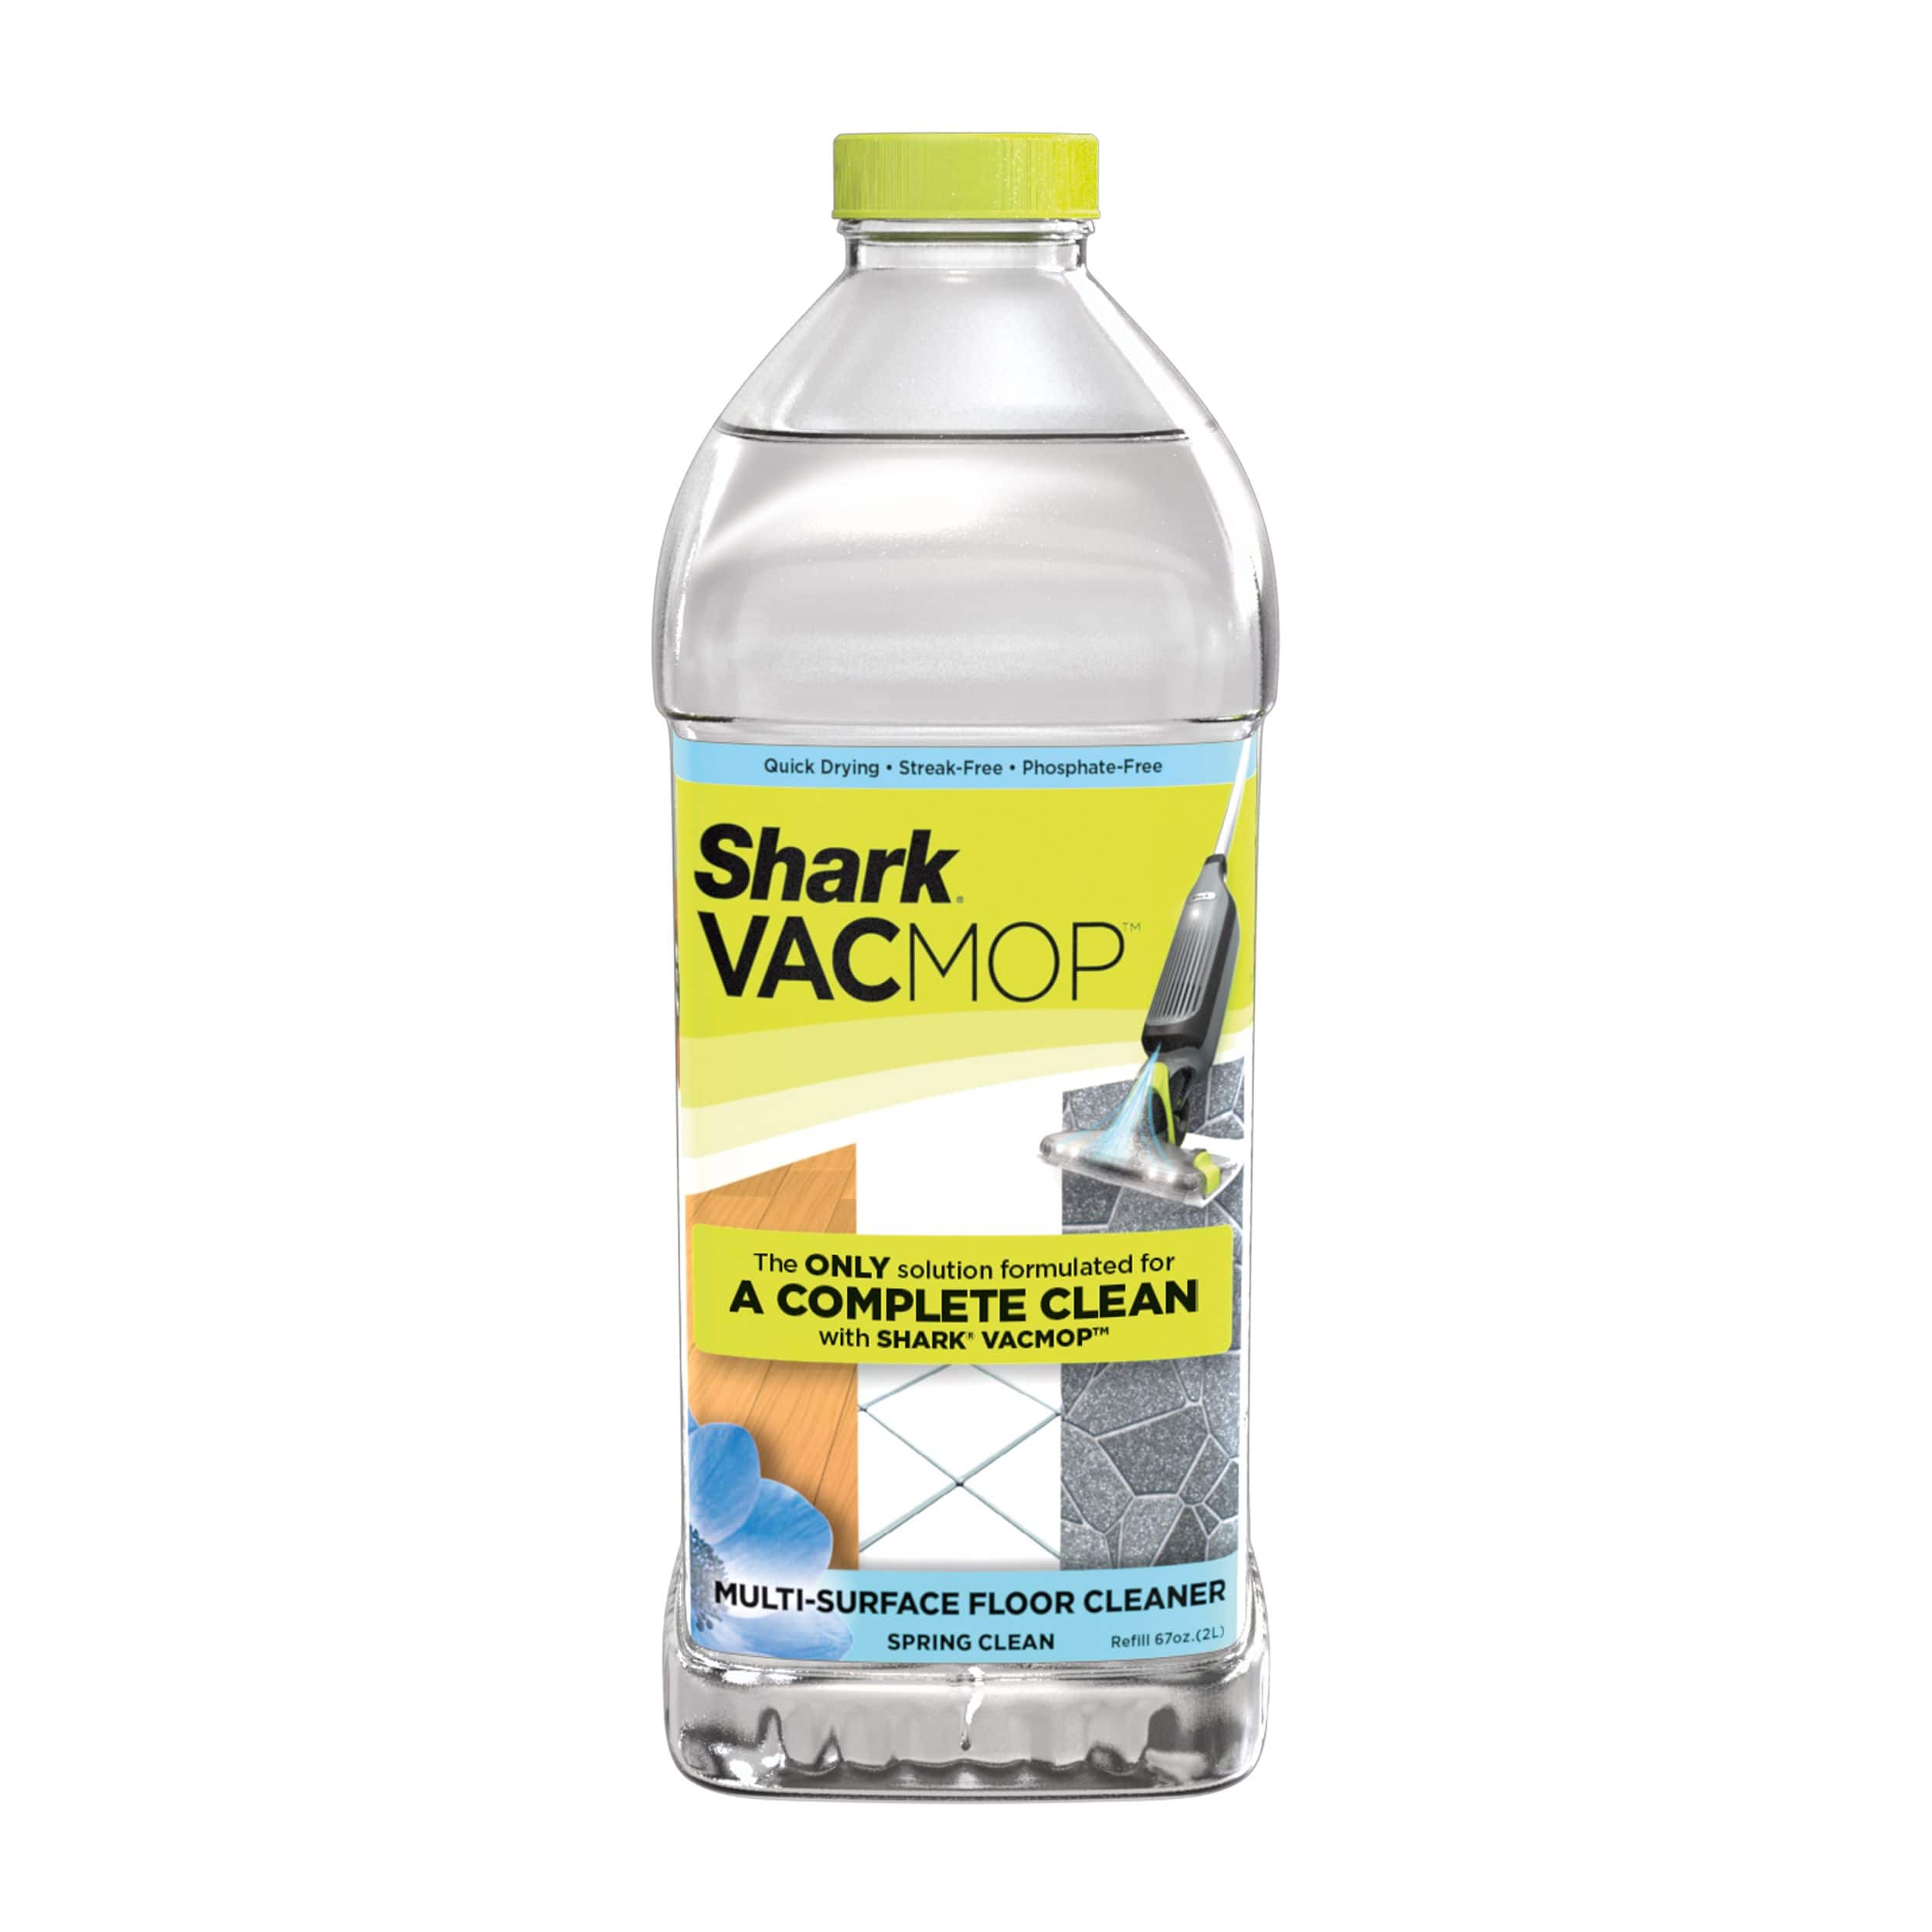 Shark Vacmop™ Multi-Surface Floor Cleaner Refill, Spring Clean Scent, 2L